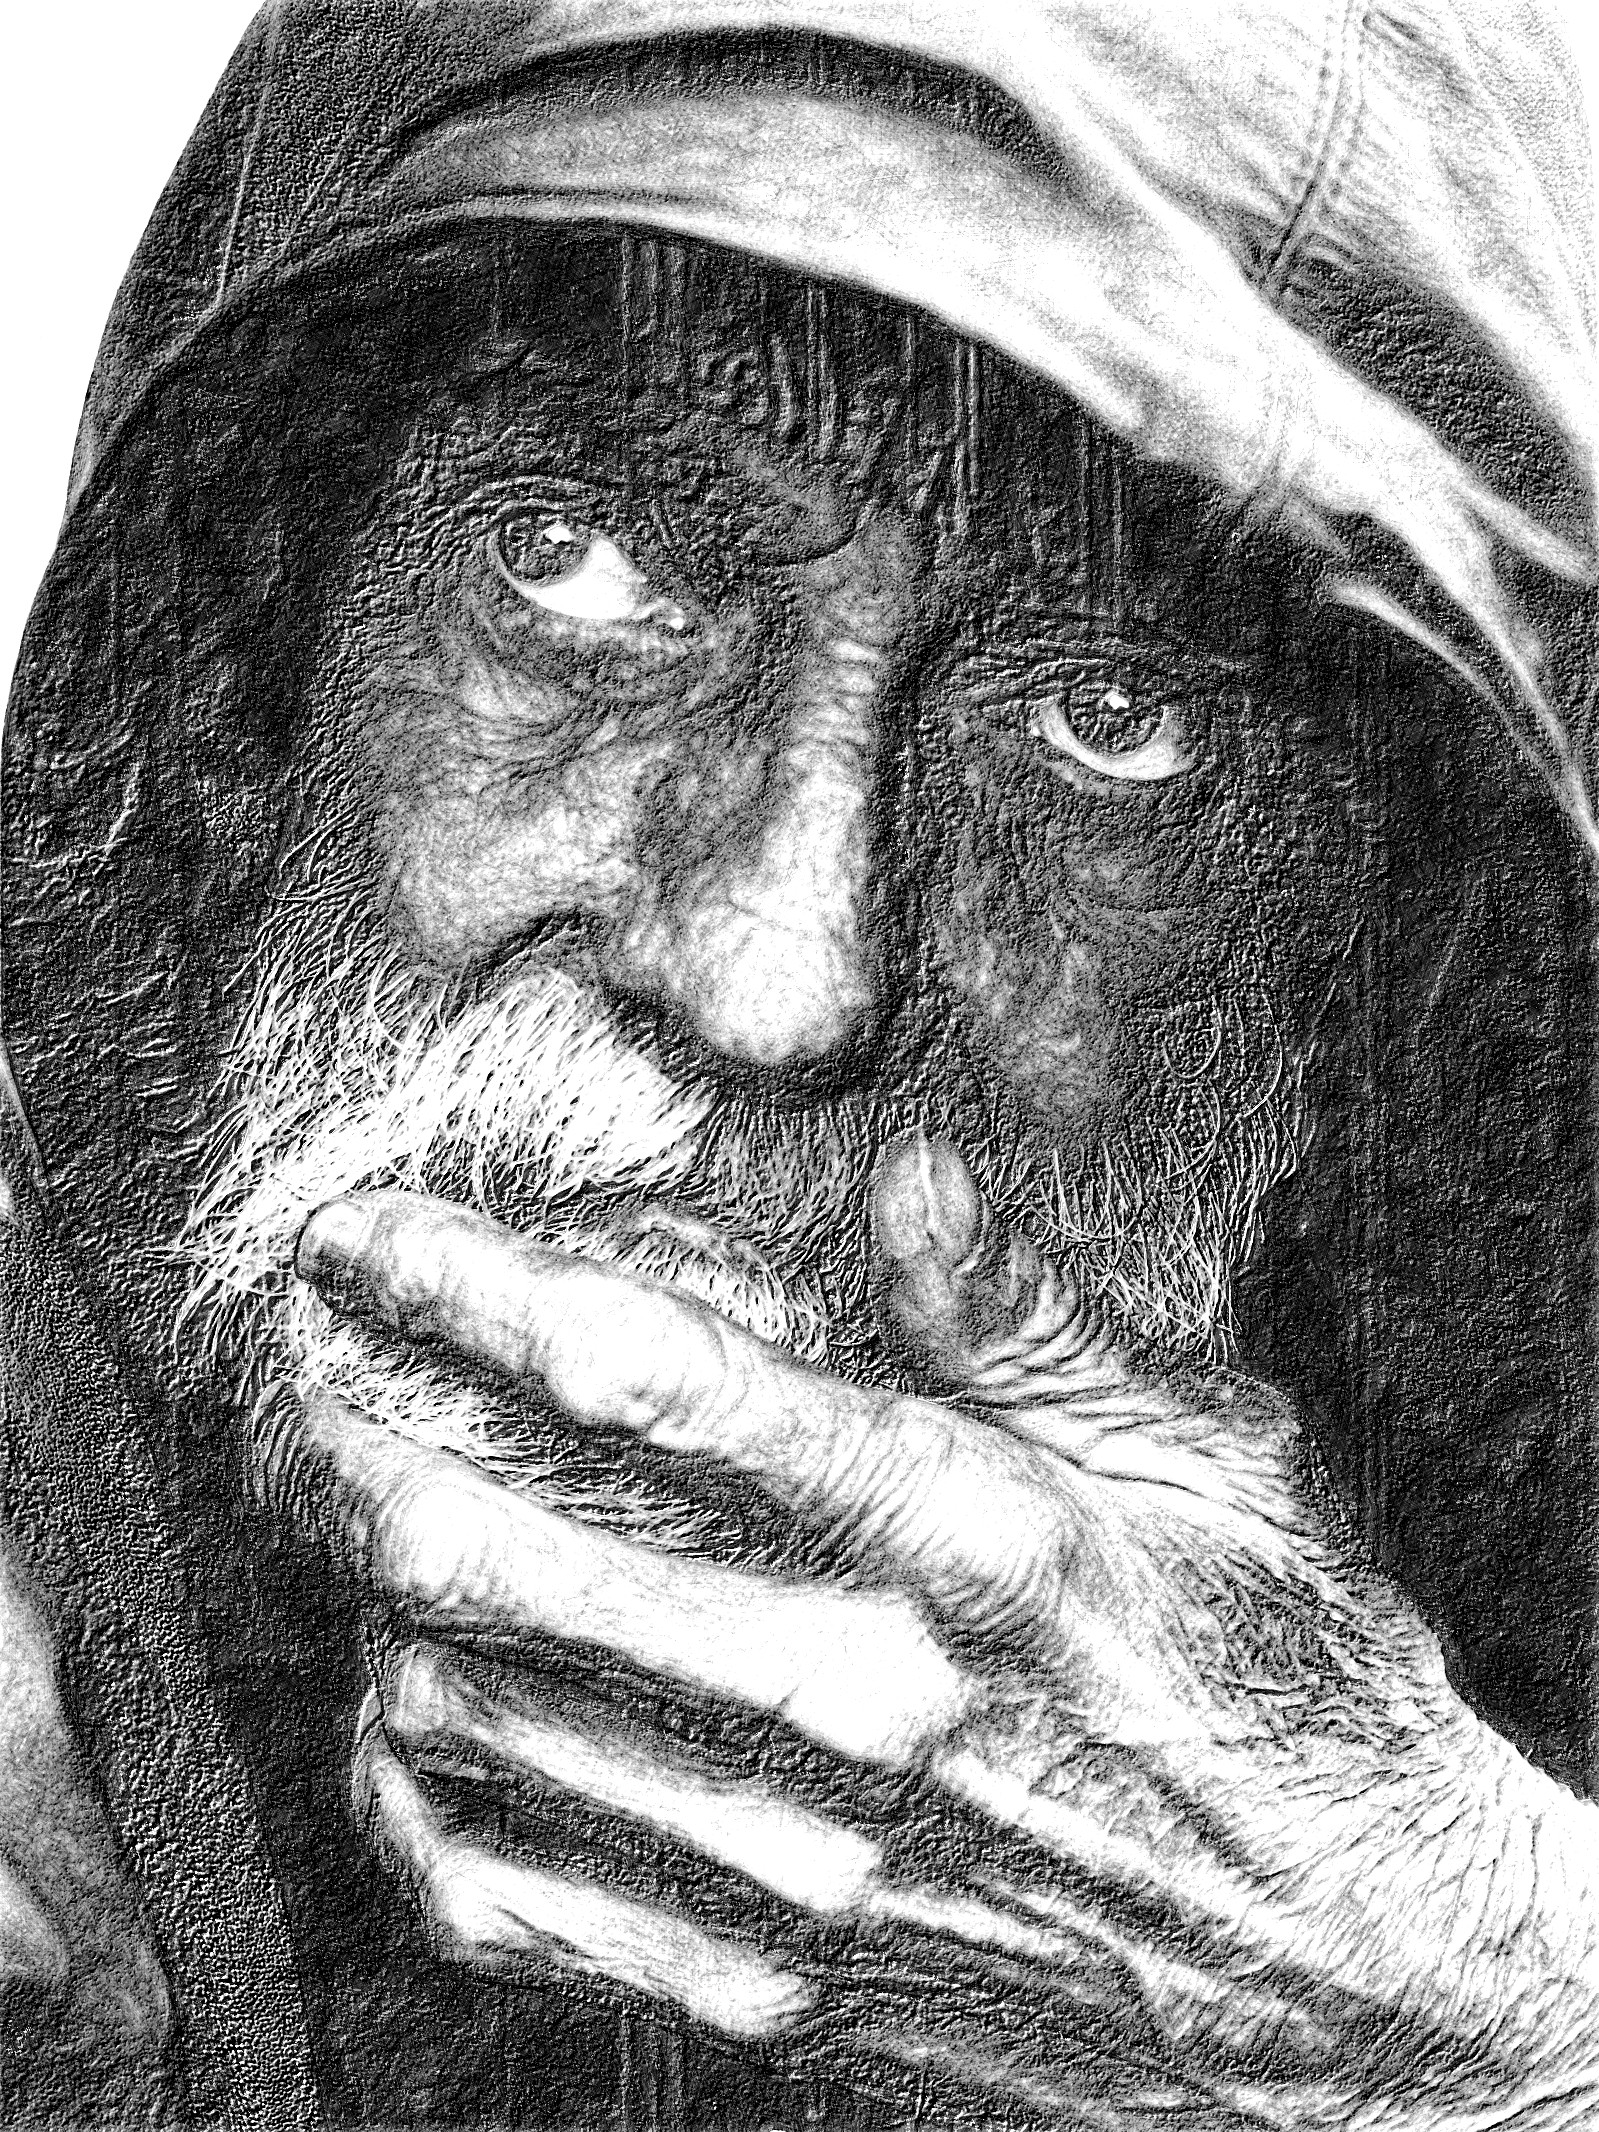 2020-08-24 08-28-03pensive-homeless-portrait-1435609-1599x2132 with a draw effect, using option colours and pencil lead=HB.jpg